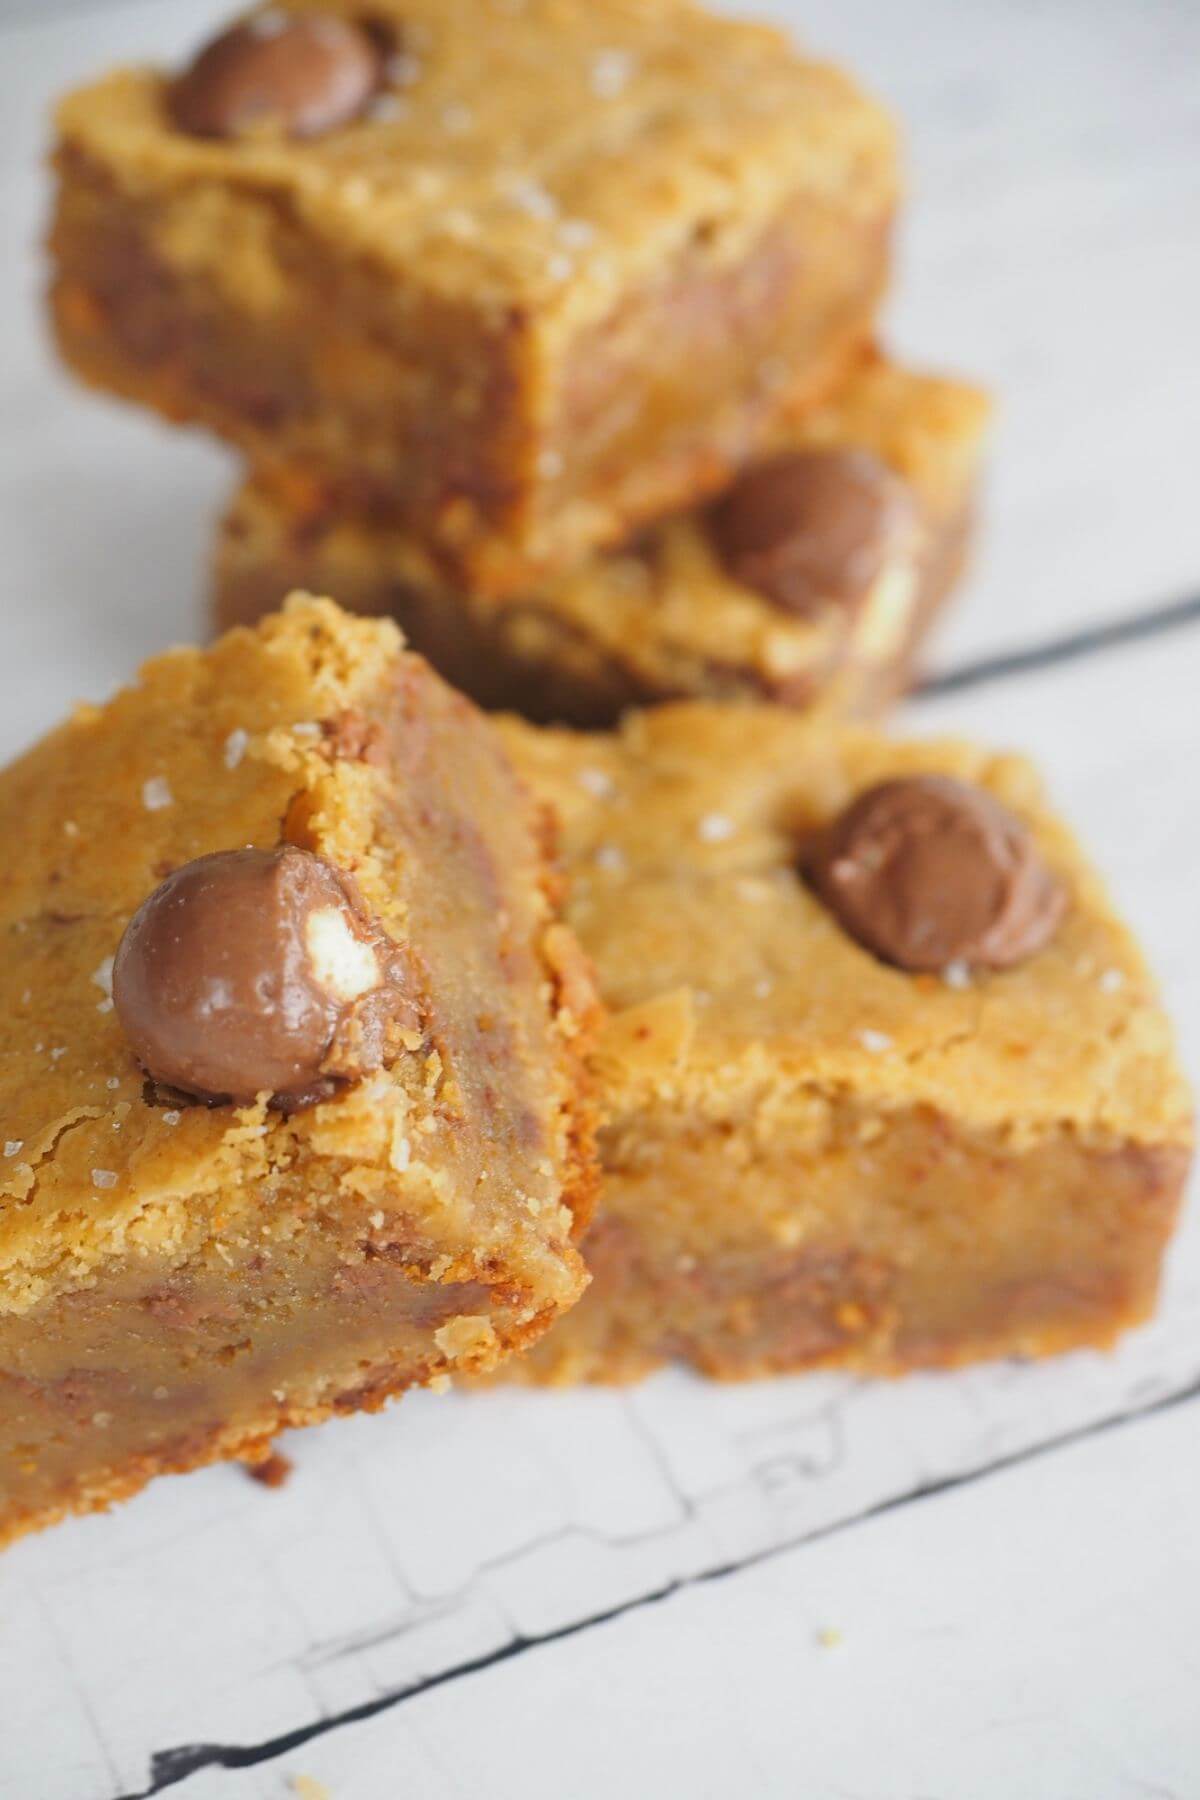 Blondies made with whoppers malted milk balls.